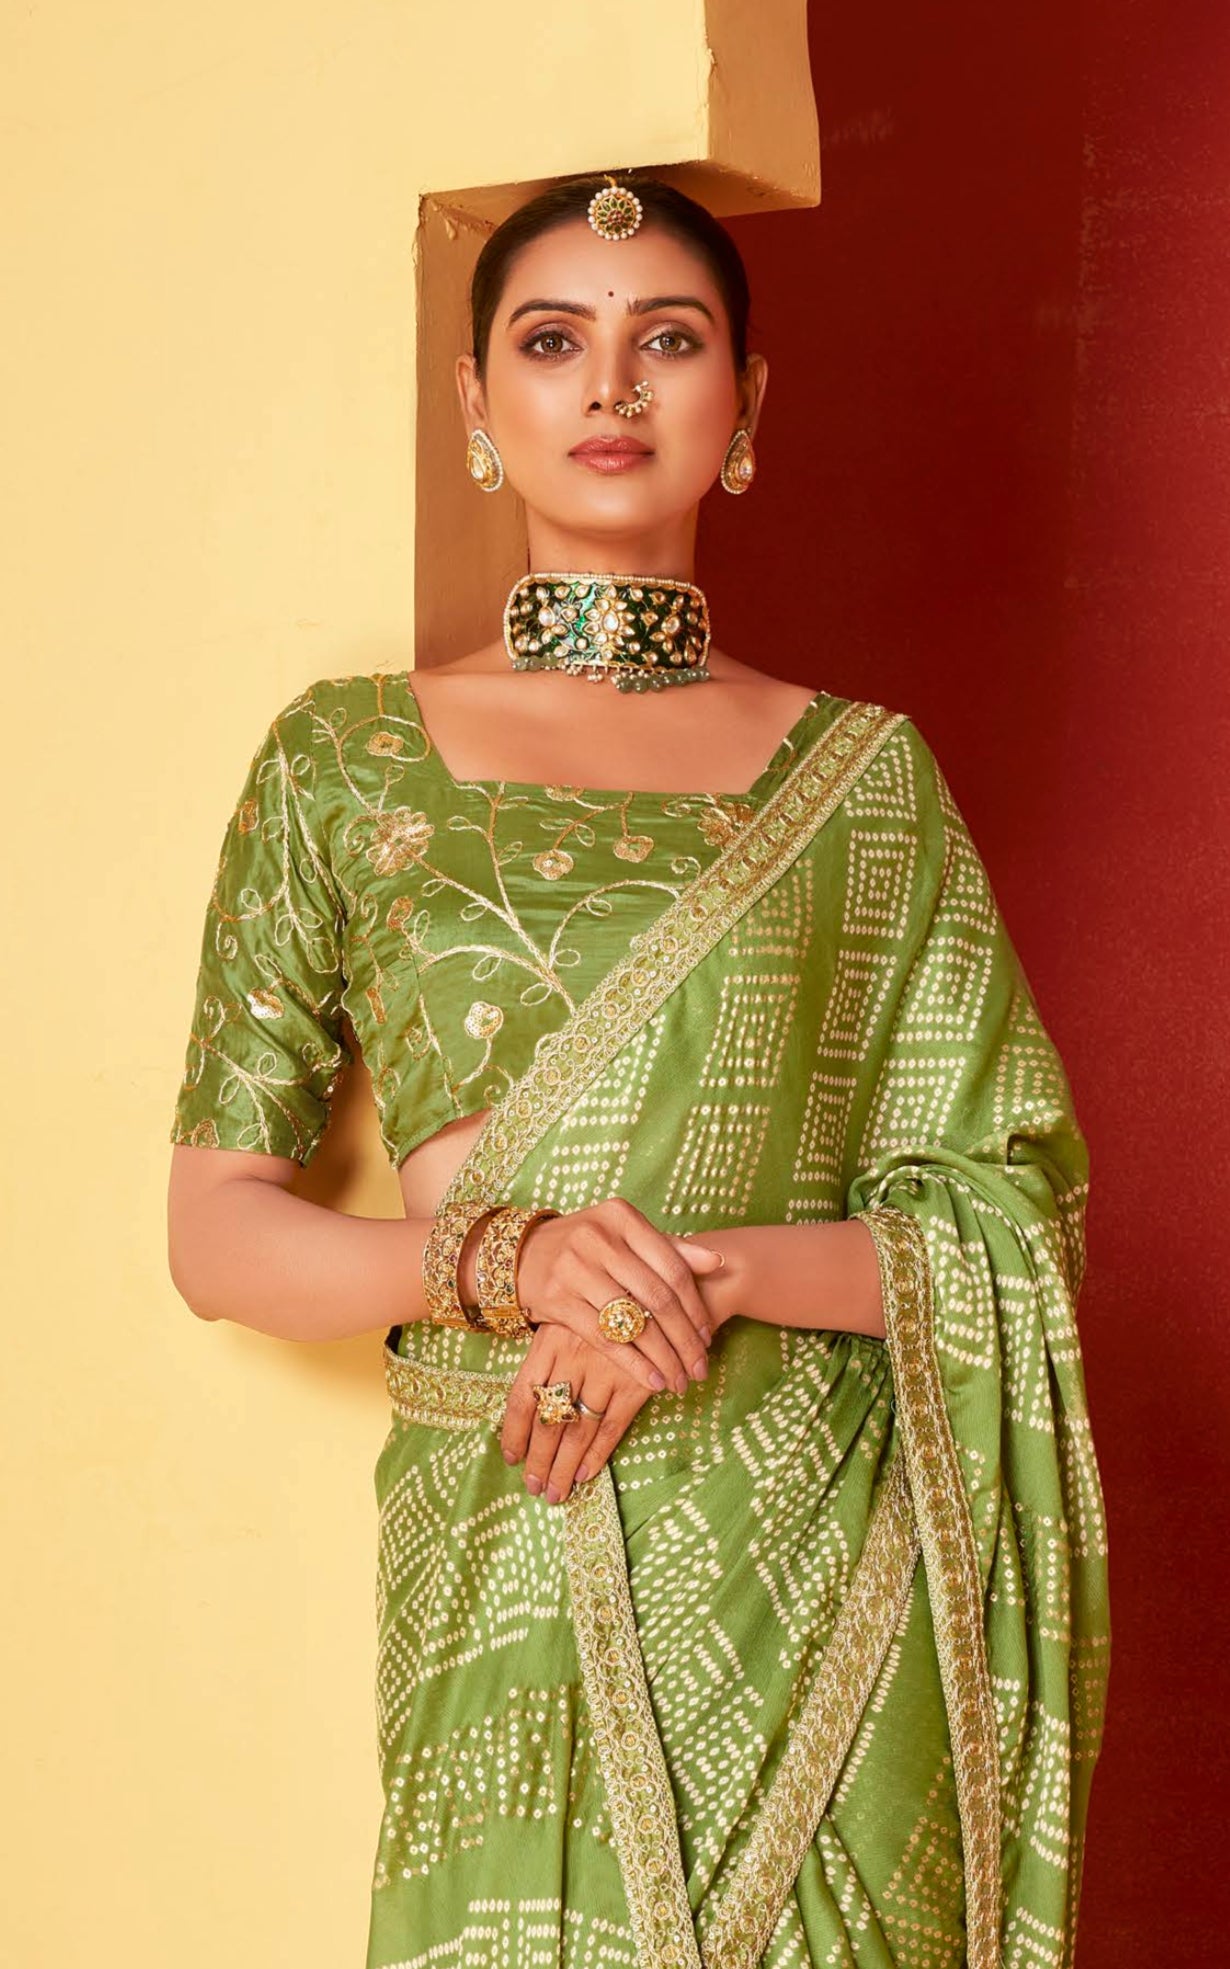 Khaki Green Moss Chiffon Foil Mill Print And Embroidery Work Border Saree With Fancy Work Blouse Sbs4